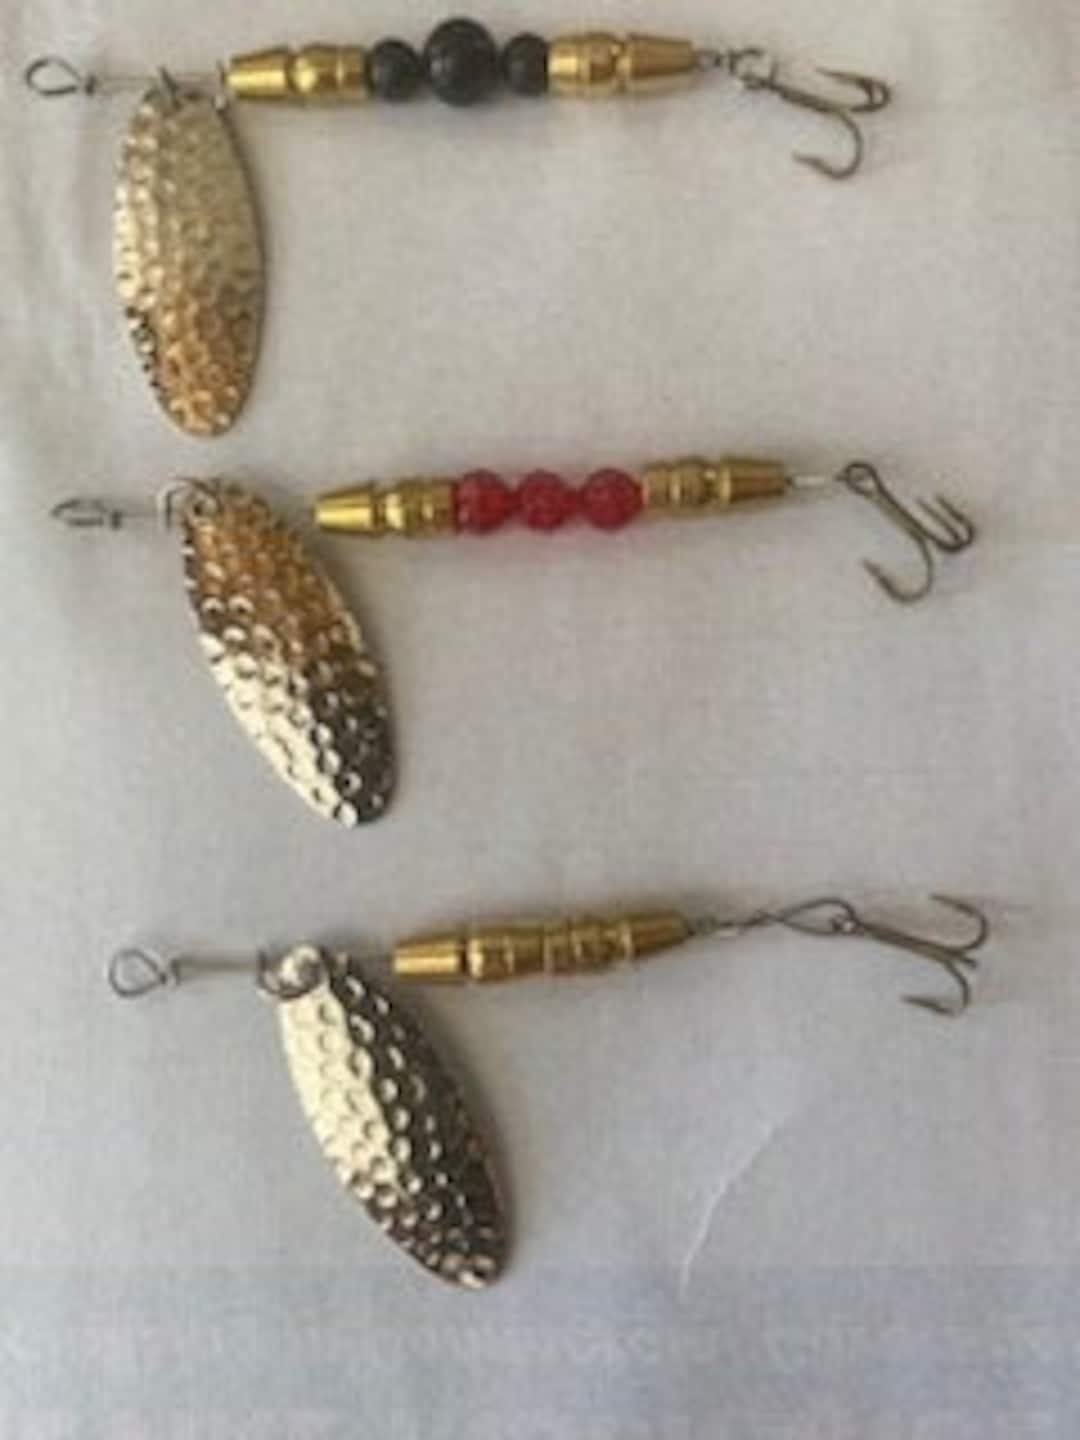 Homemade Quality Fishing Spinners 